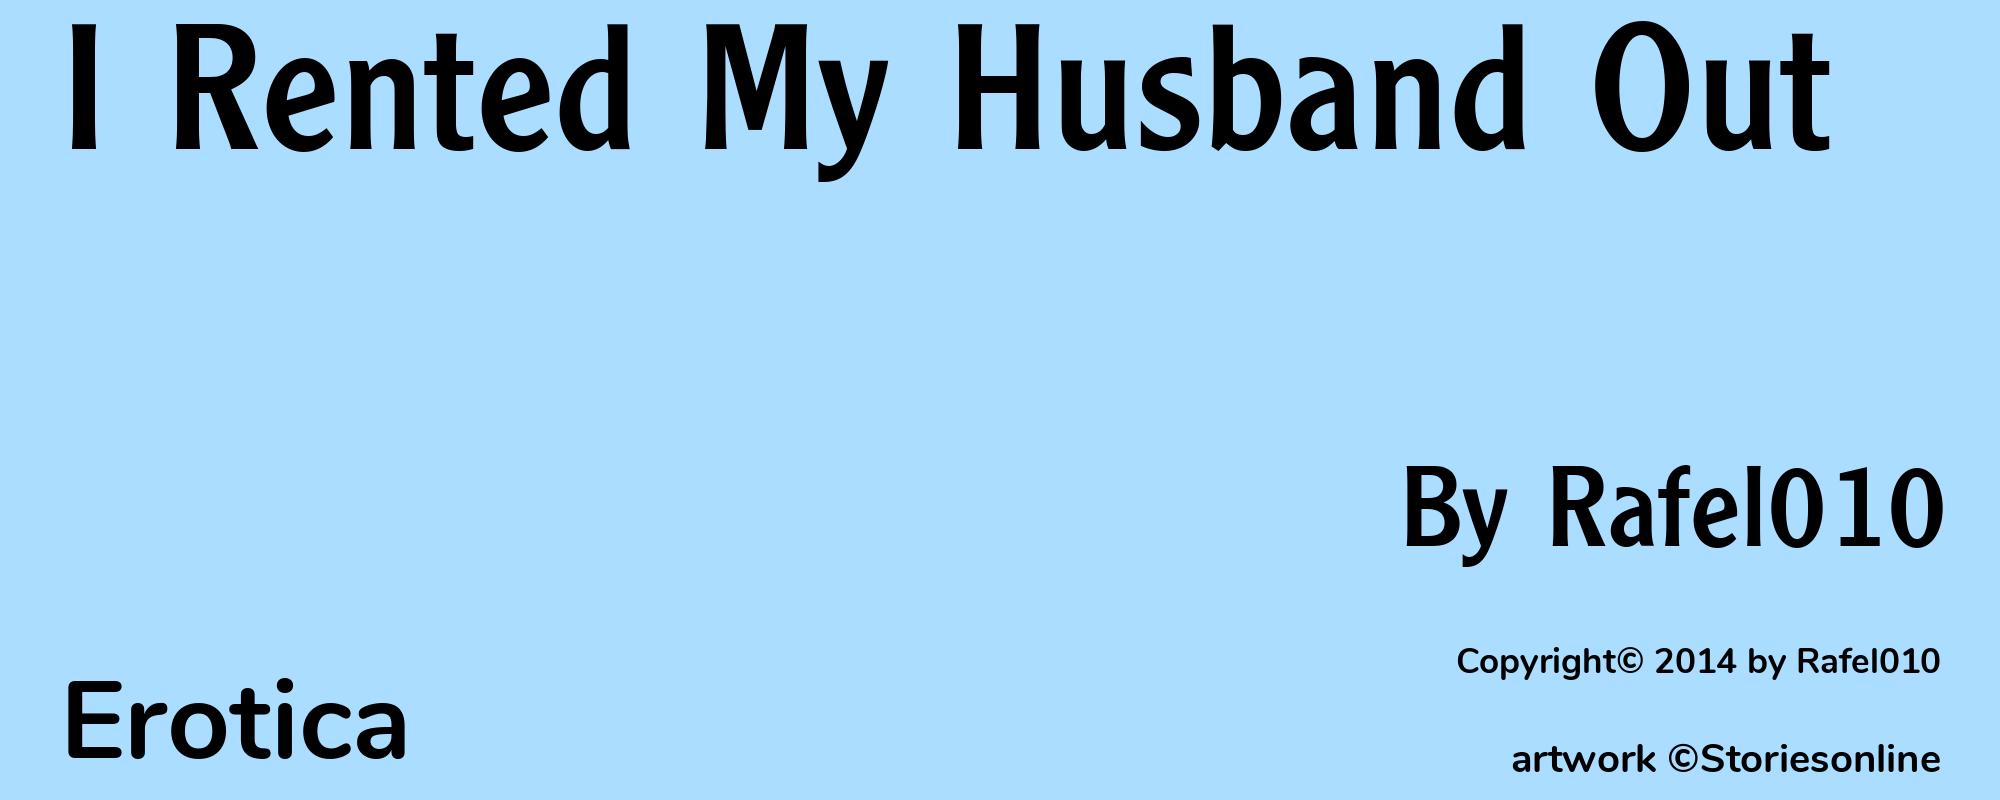 I Rented My Husband Out - Cover